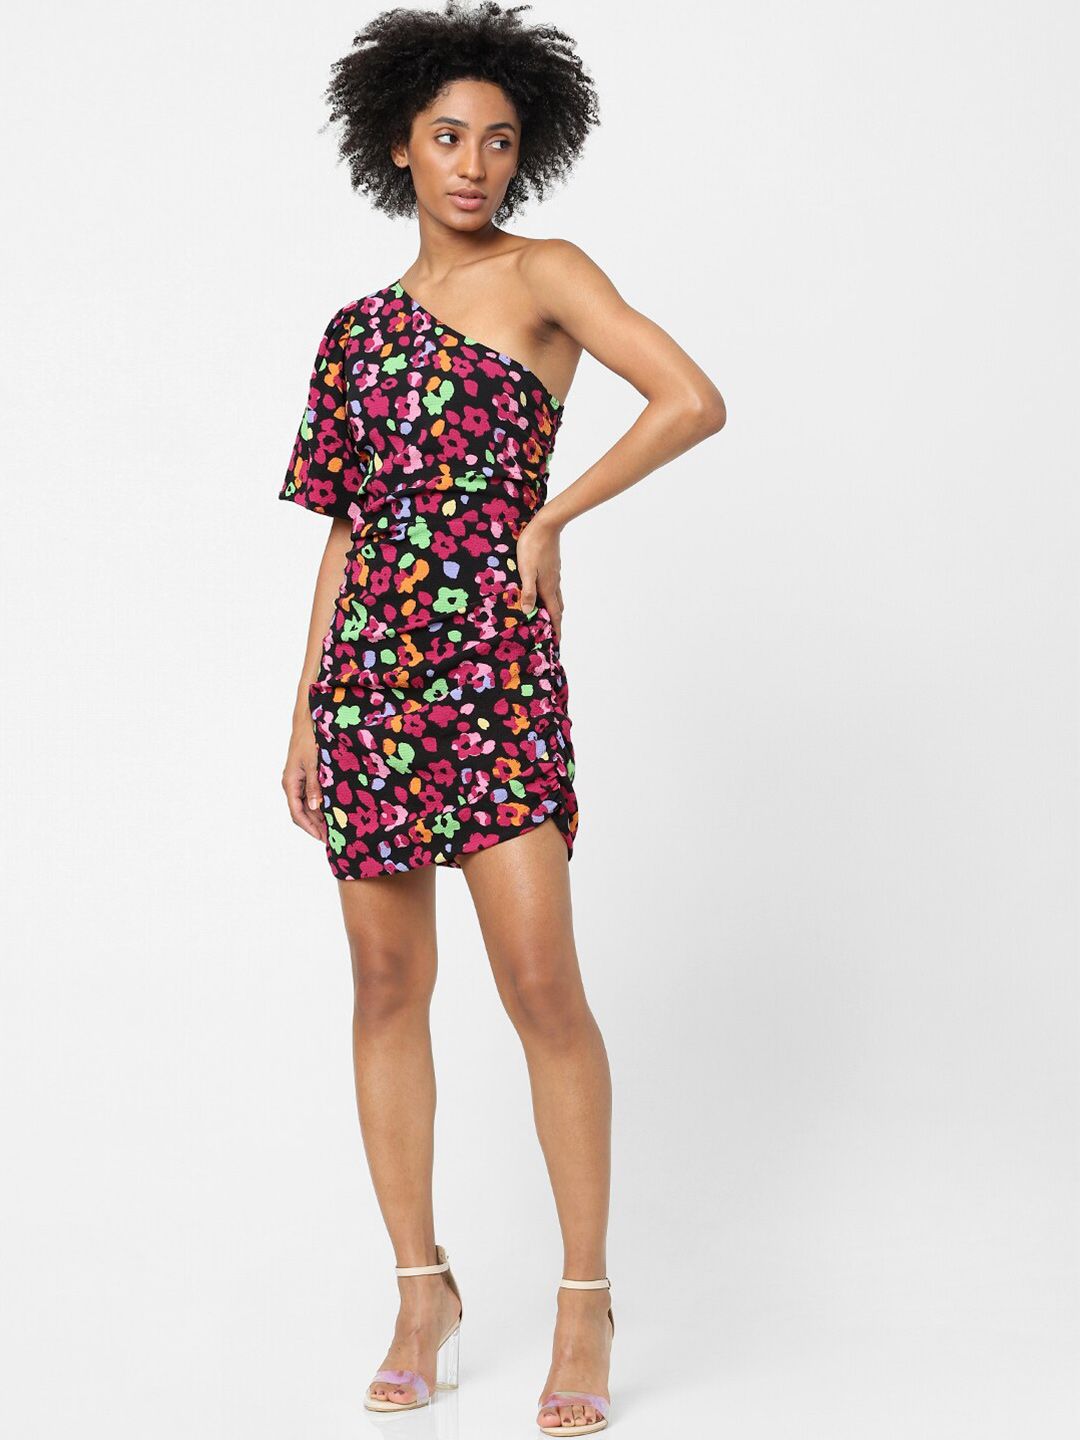 ONLY Black Floral Mini Dress Price in India